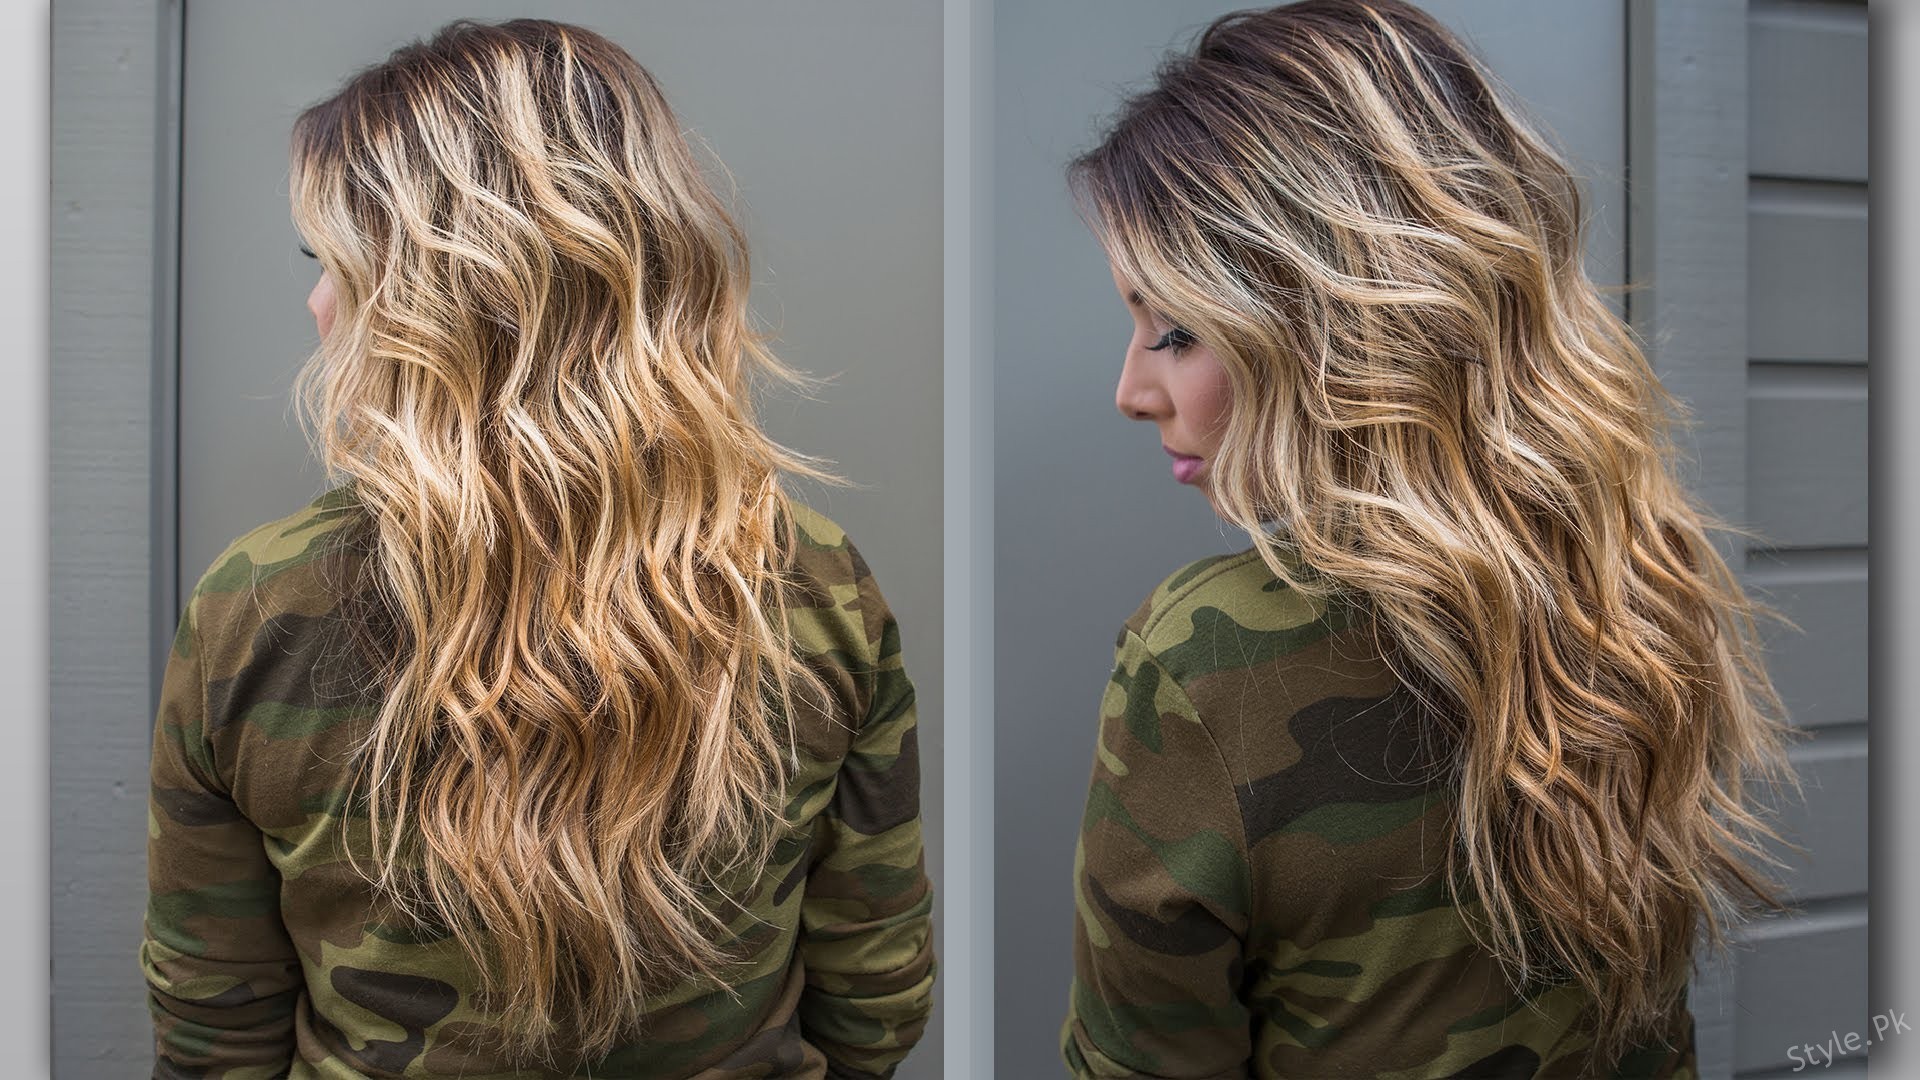 Blue Beach Waves Hair: How to Protect Against Sun Damage - wide 2